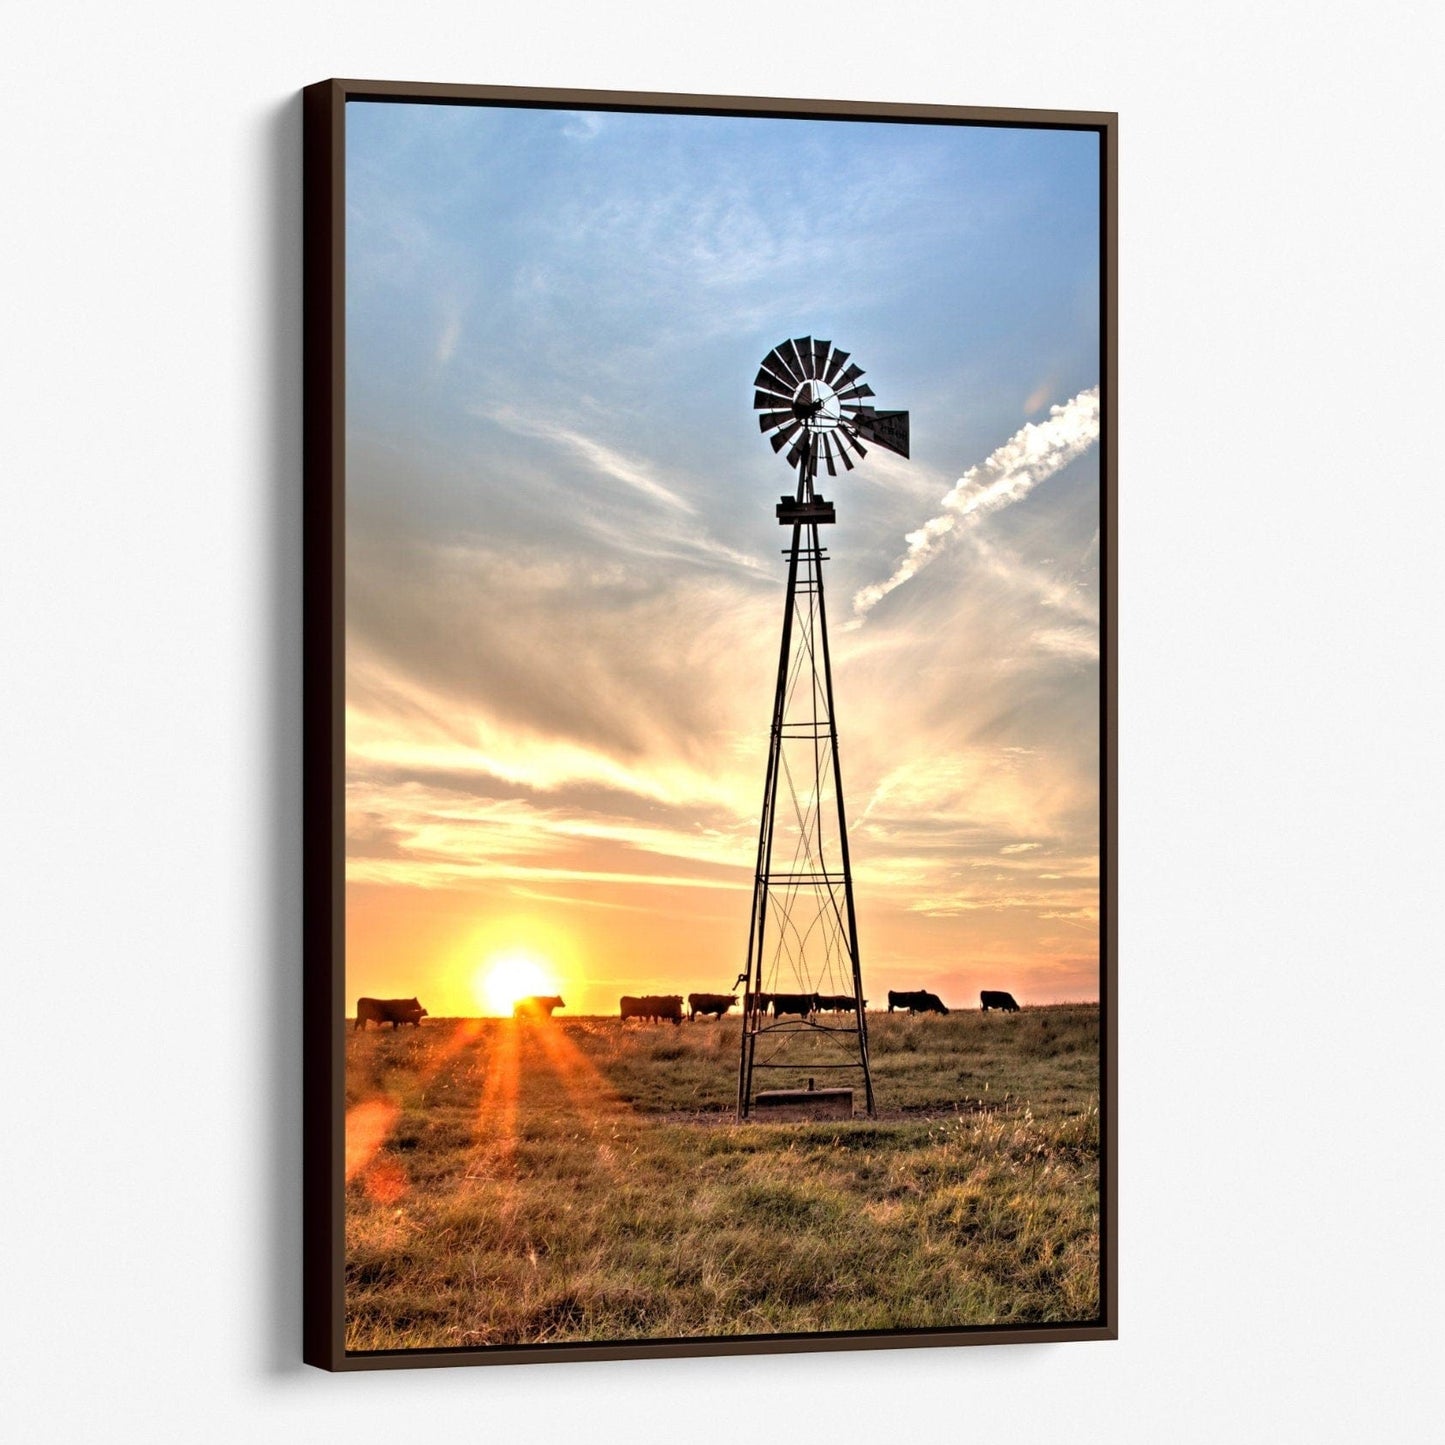 Teri James Photography Wall Art Canvas-Walnut Frame / 12 x 18 Inches Rustic Windmill and Black Angus Cattle at Sunset